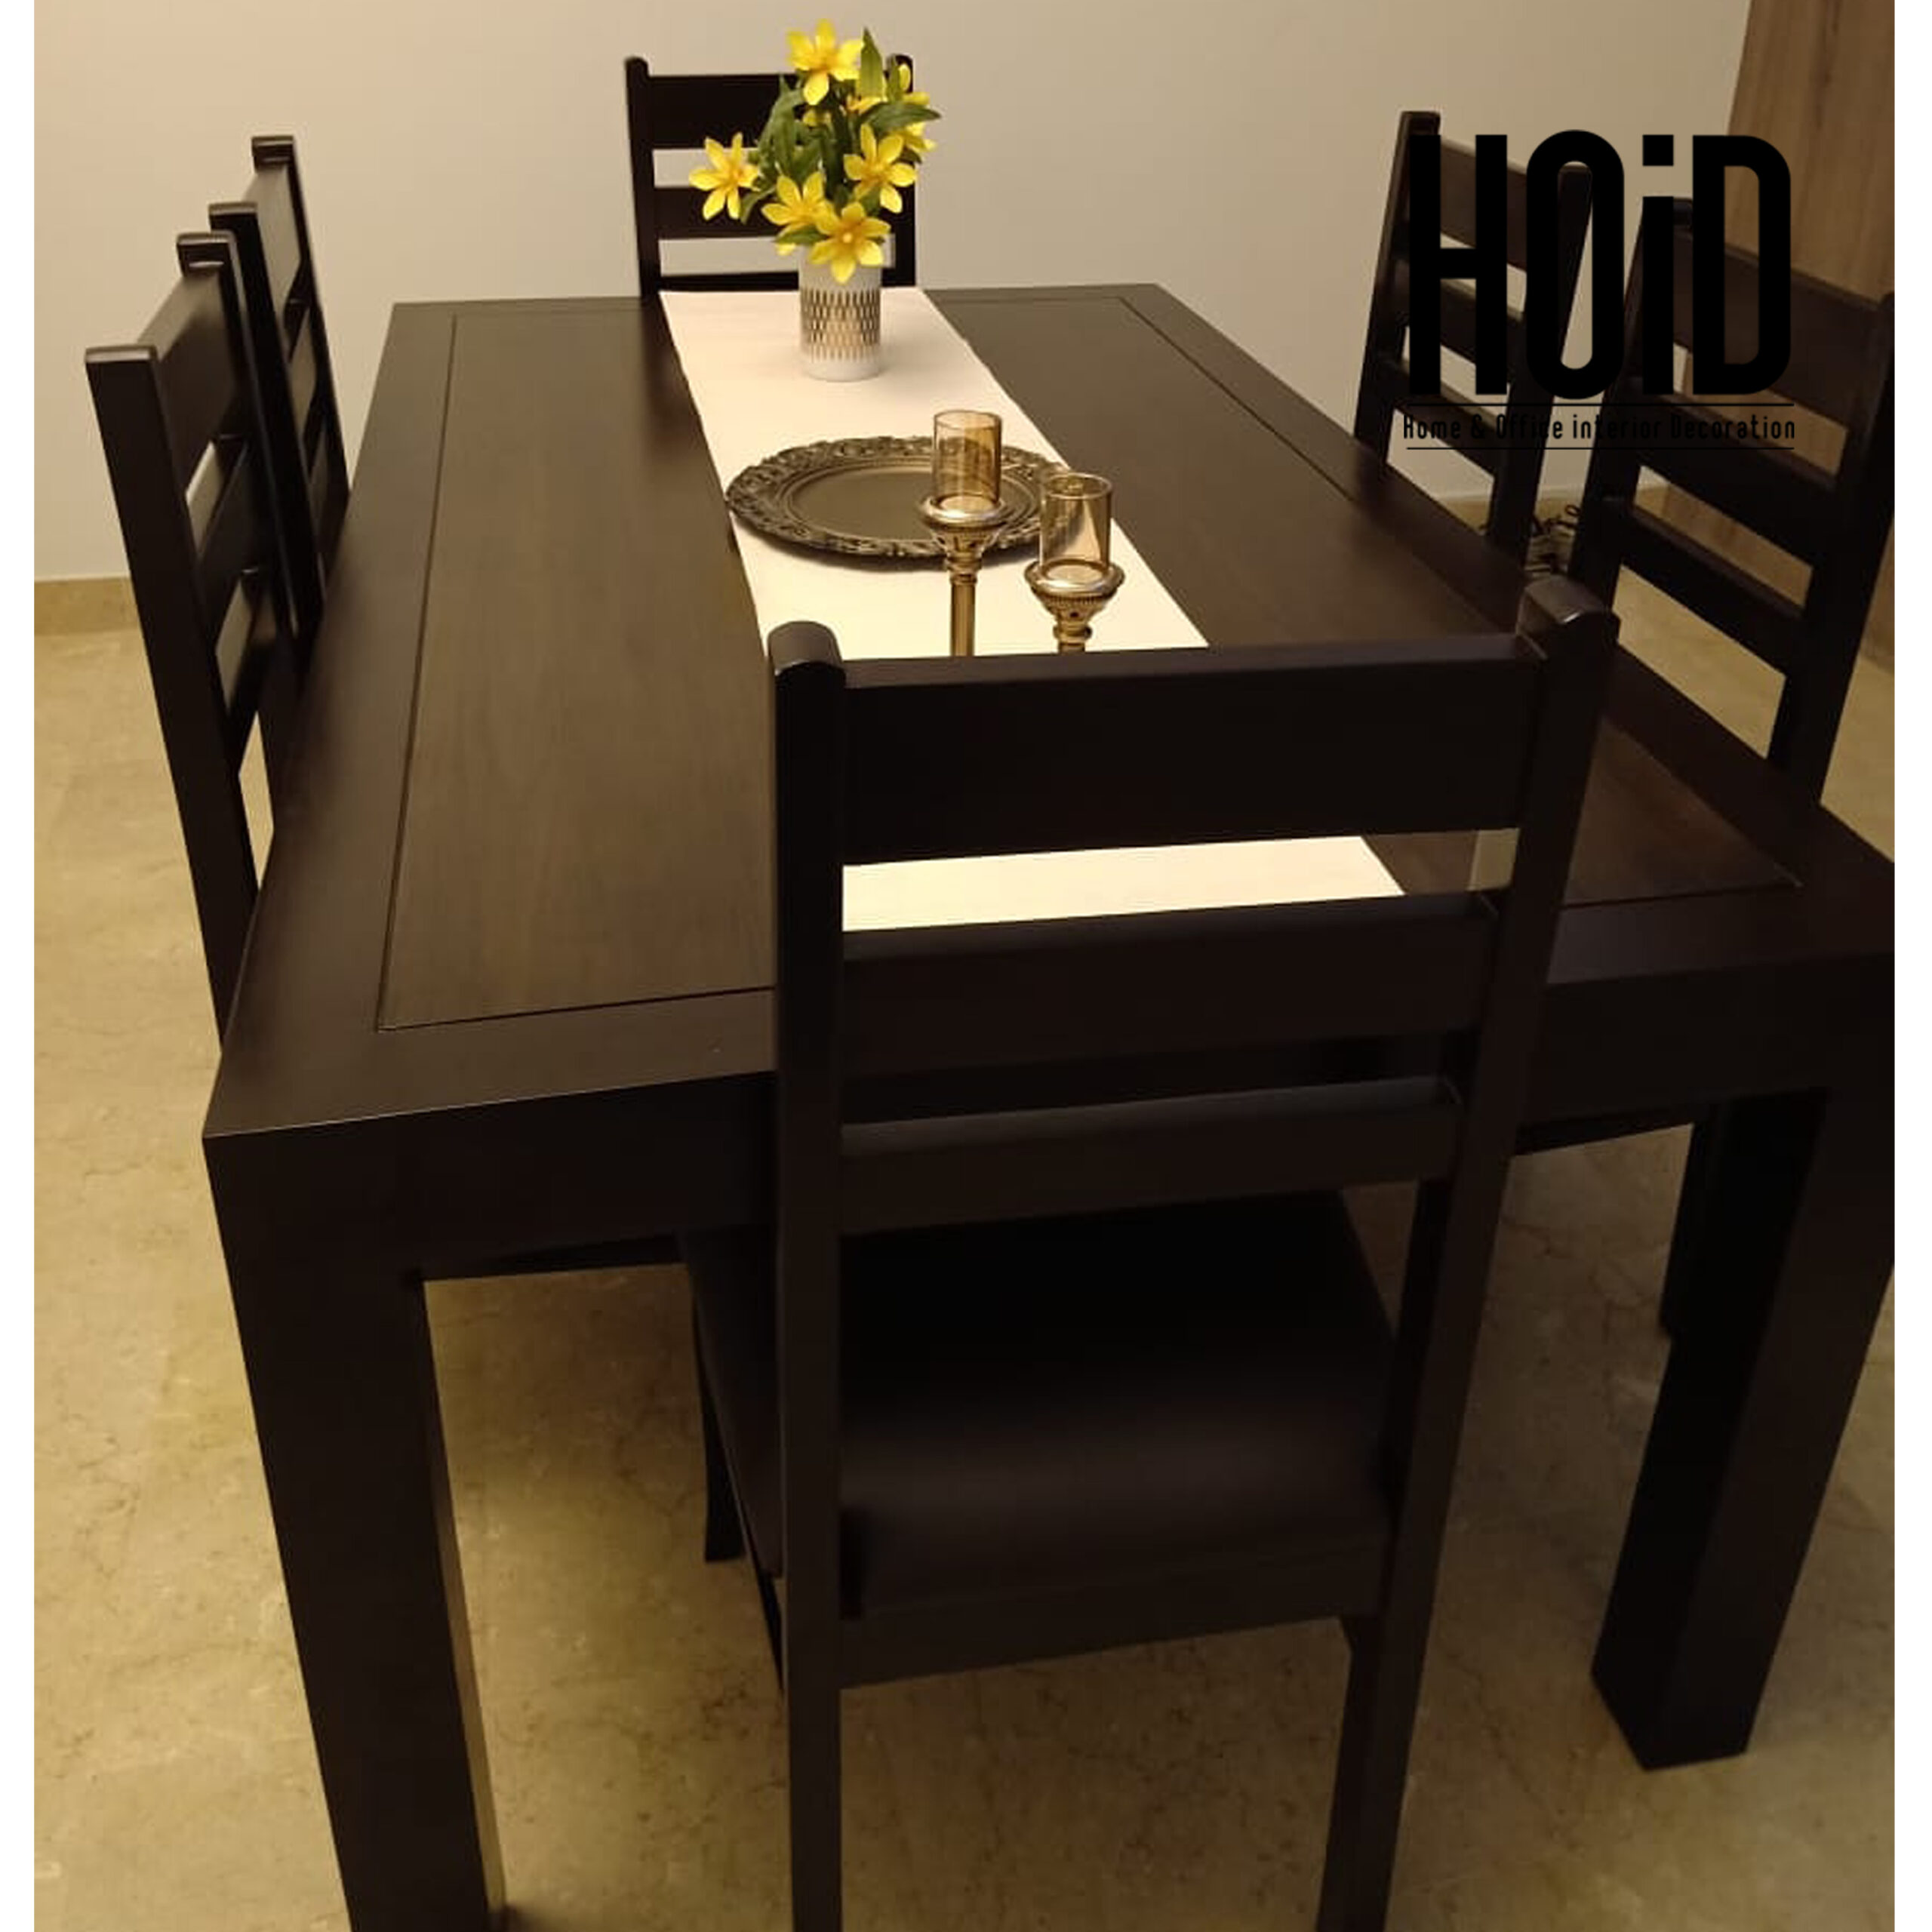 6 Seater Dining Table With Chairs, 6 Chair Dining Table Size